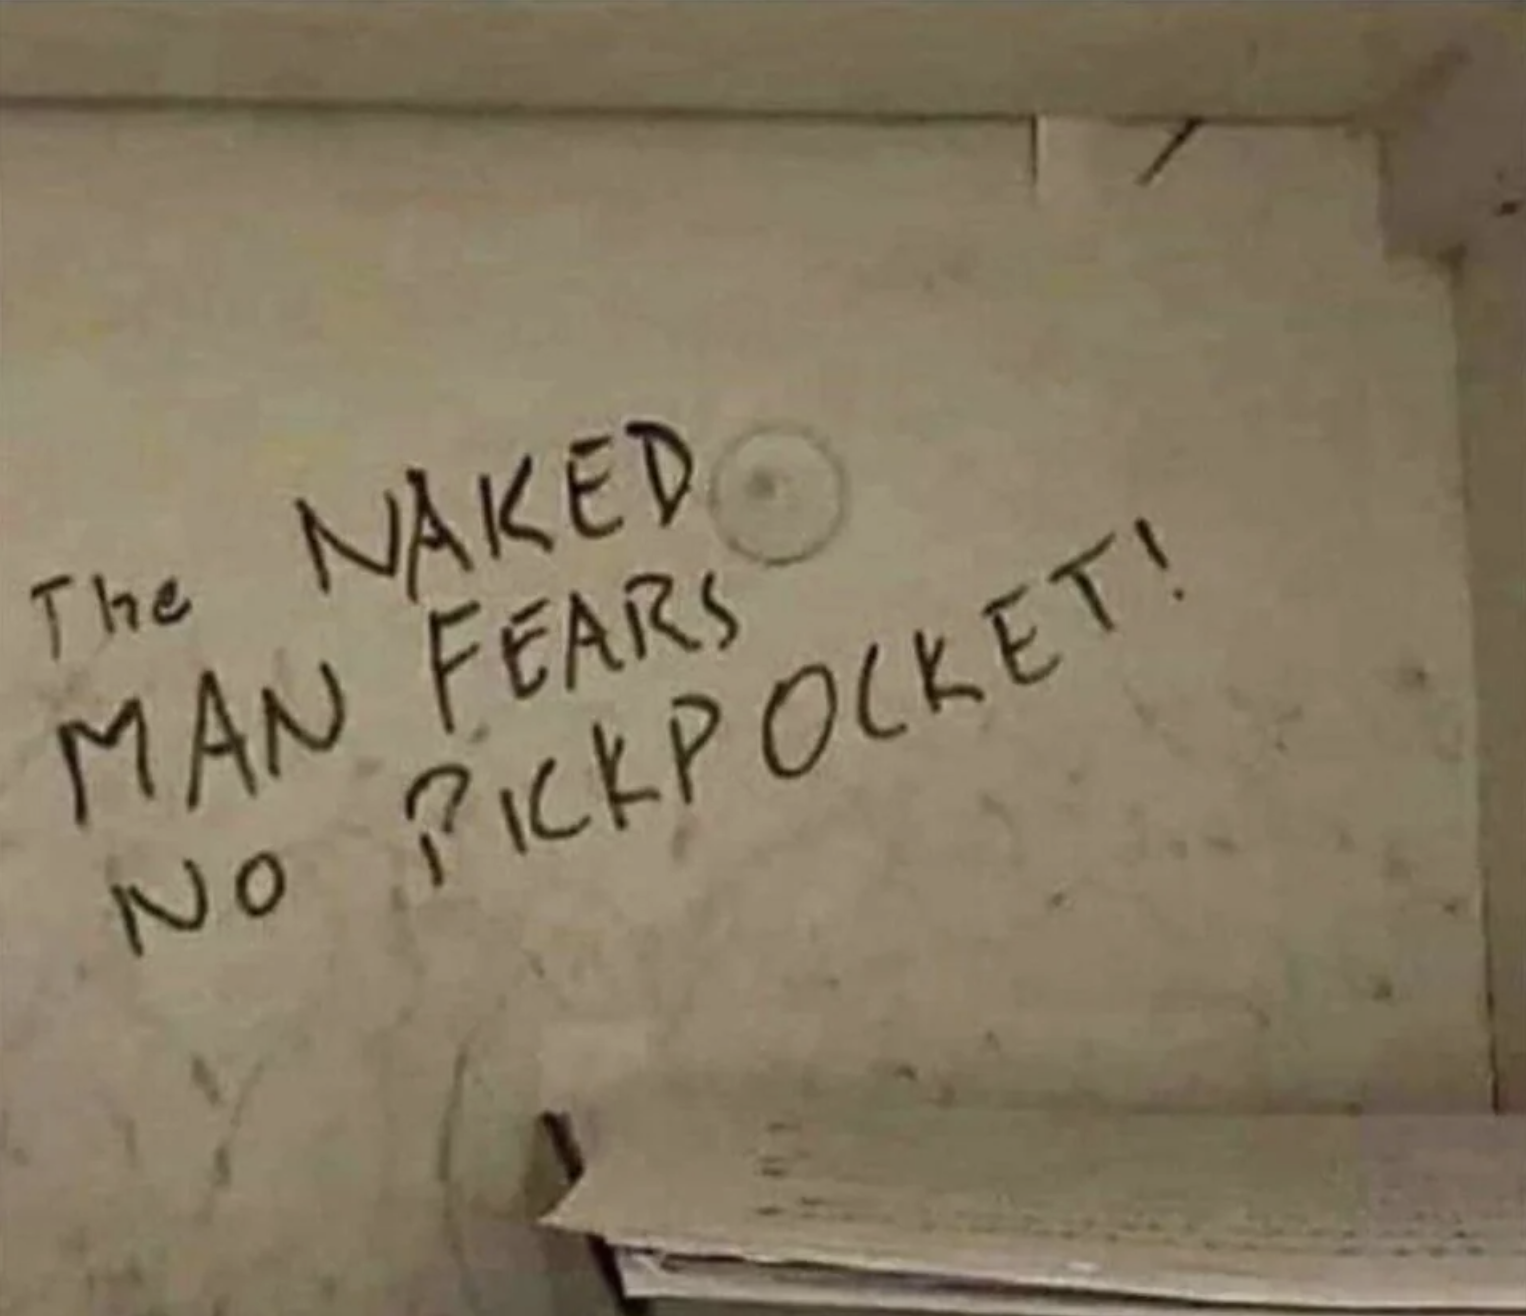 &quot;The naked man fears no pickpocket!&quot;